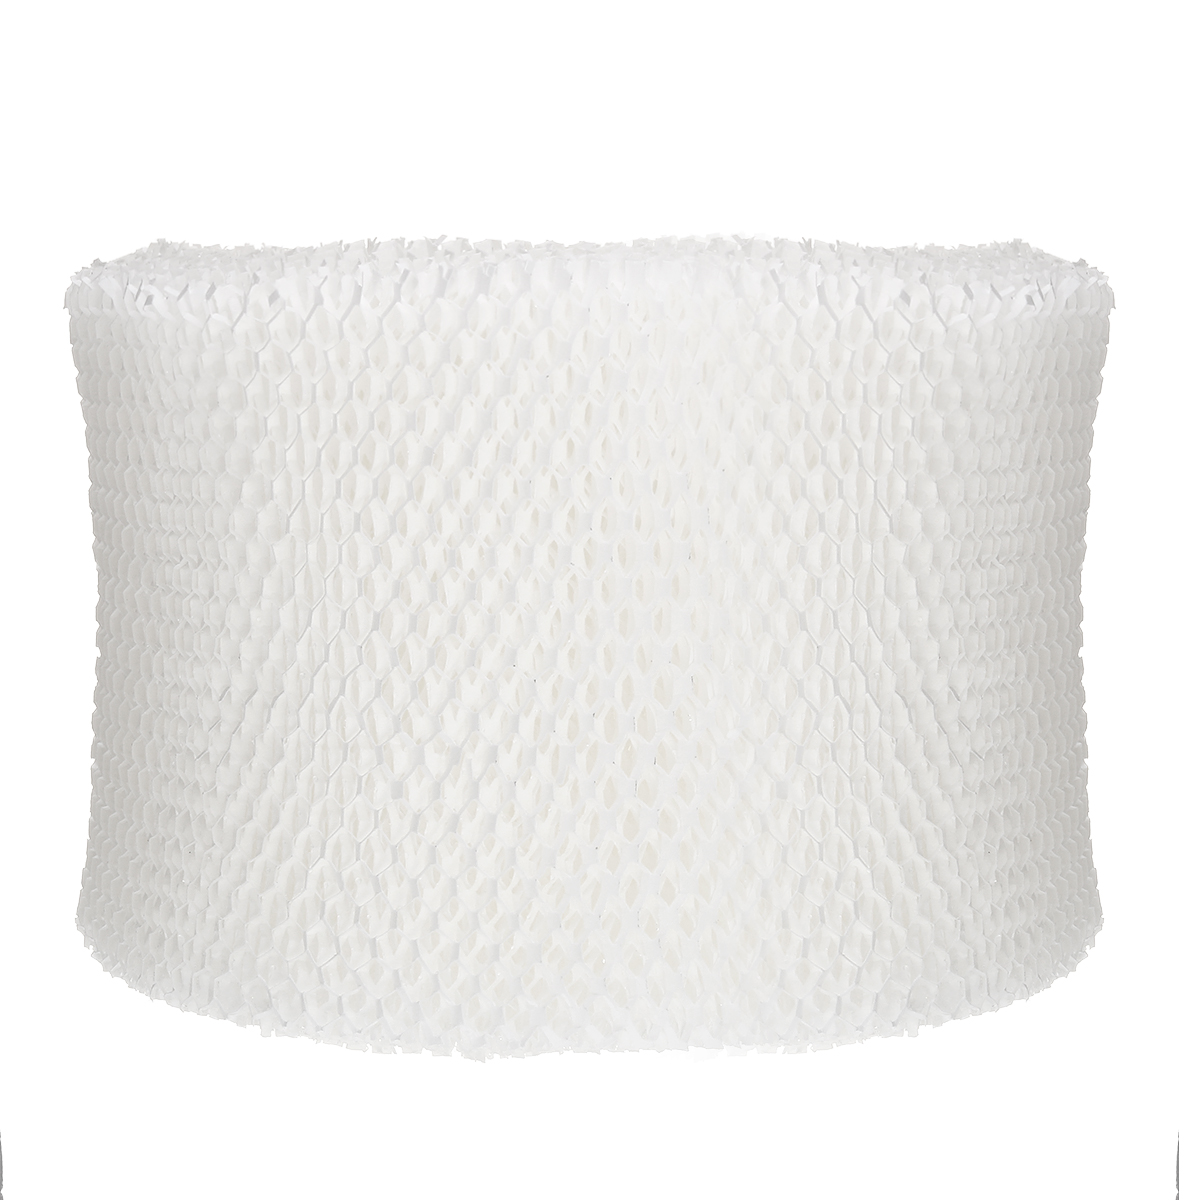 HWF75-Replacement-Filter-Net-for-Holmes-Humidifier-1660341-2